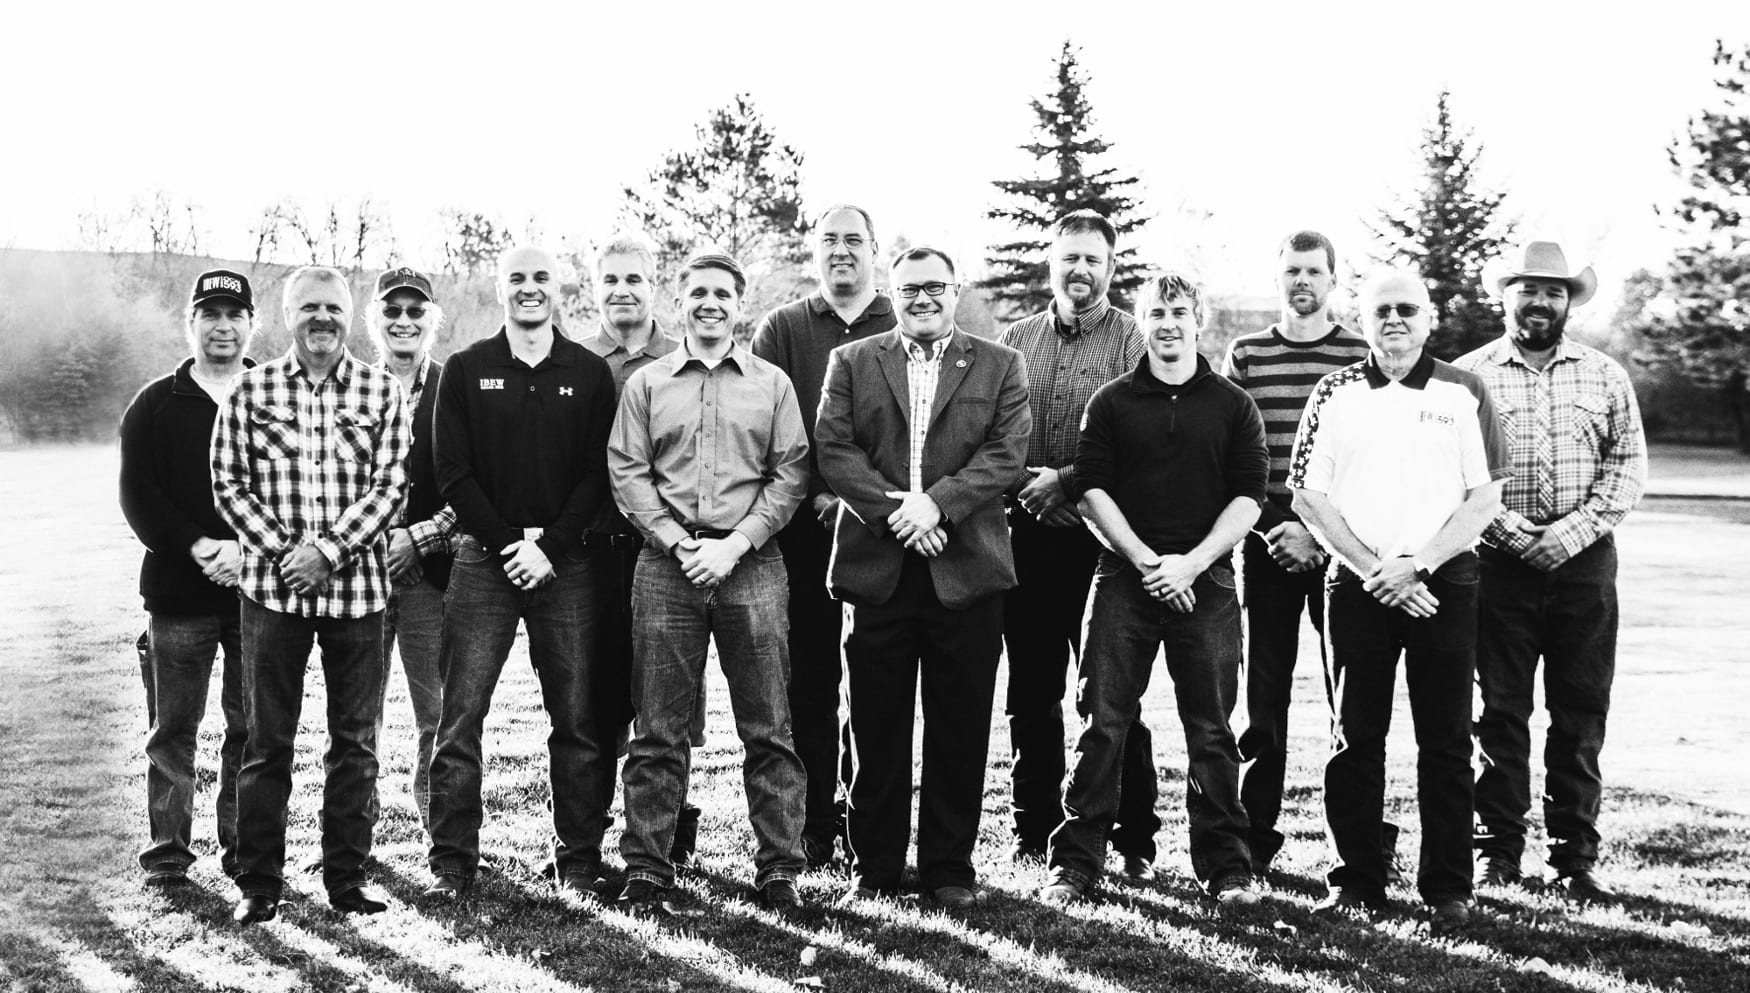 Black and white photo of 13 men wearing jeans and standing in a yard